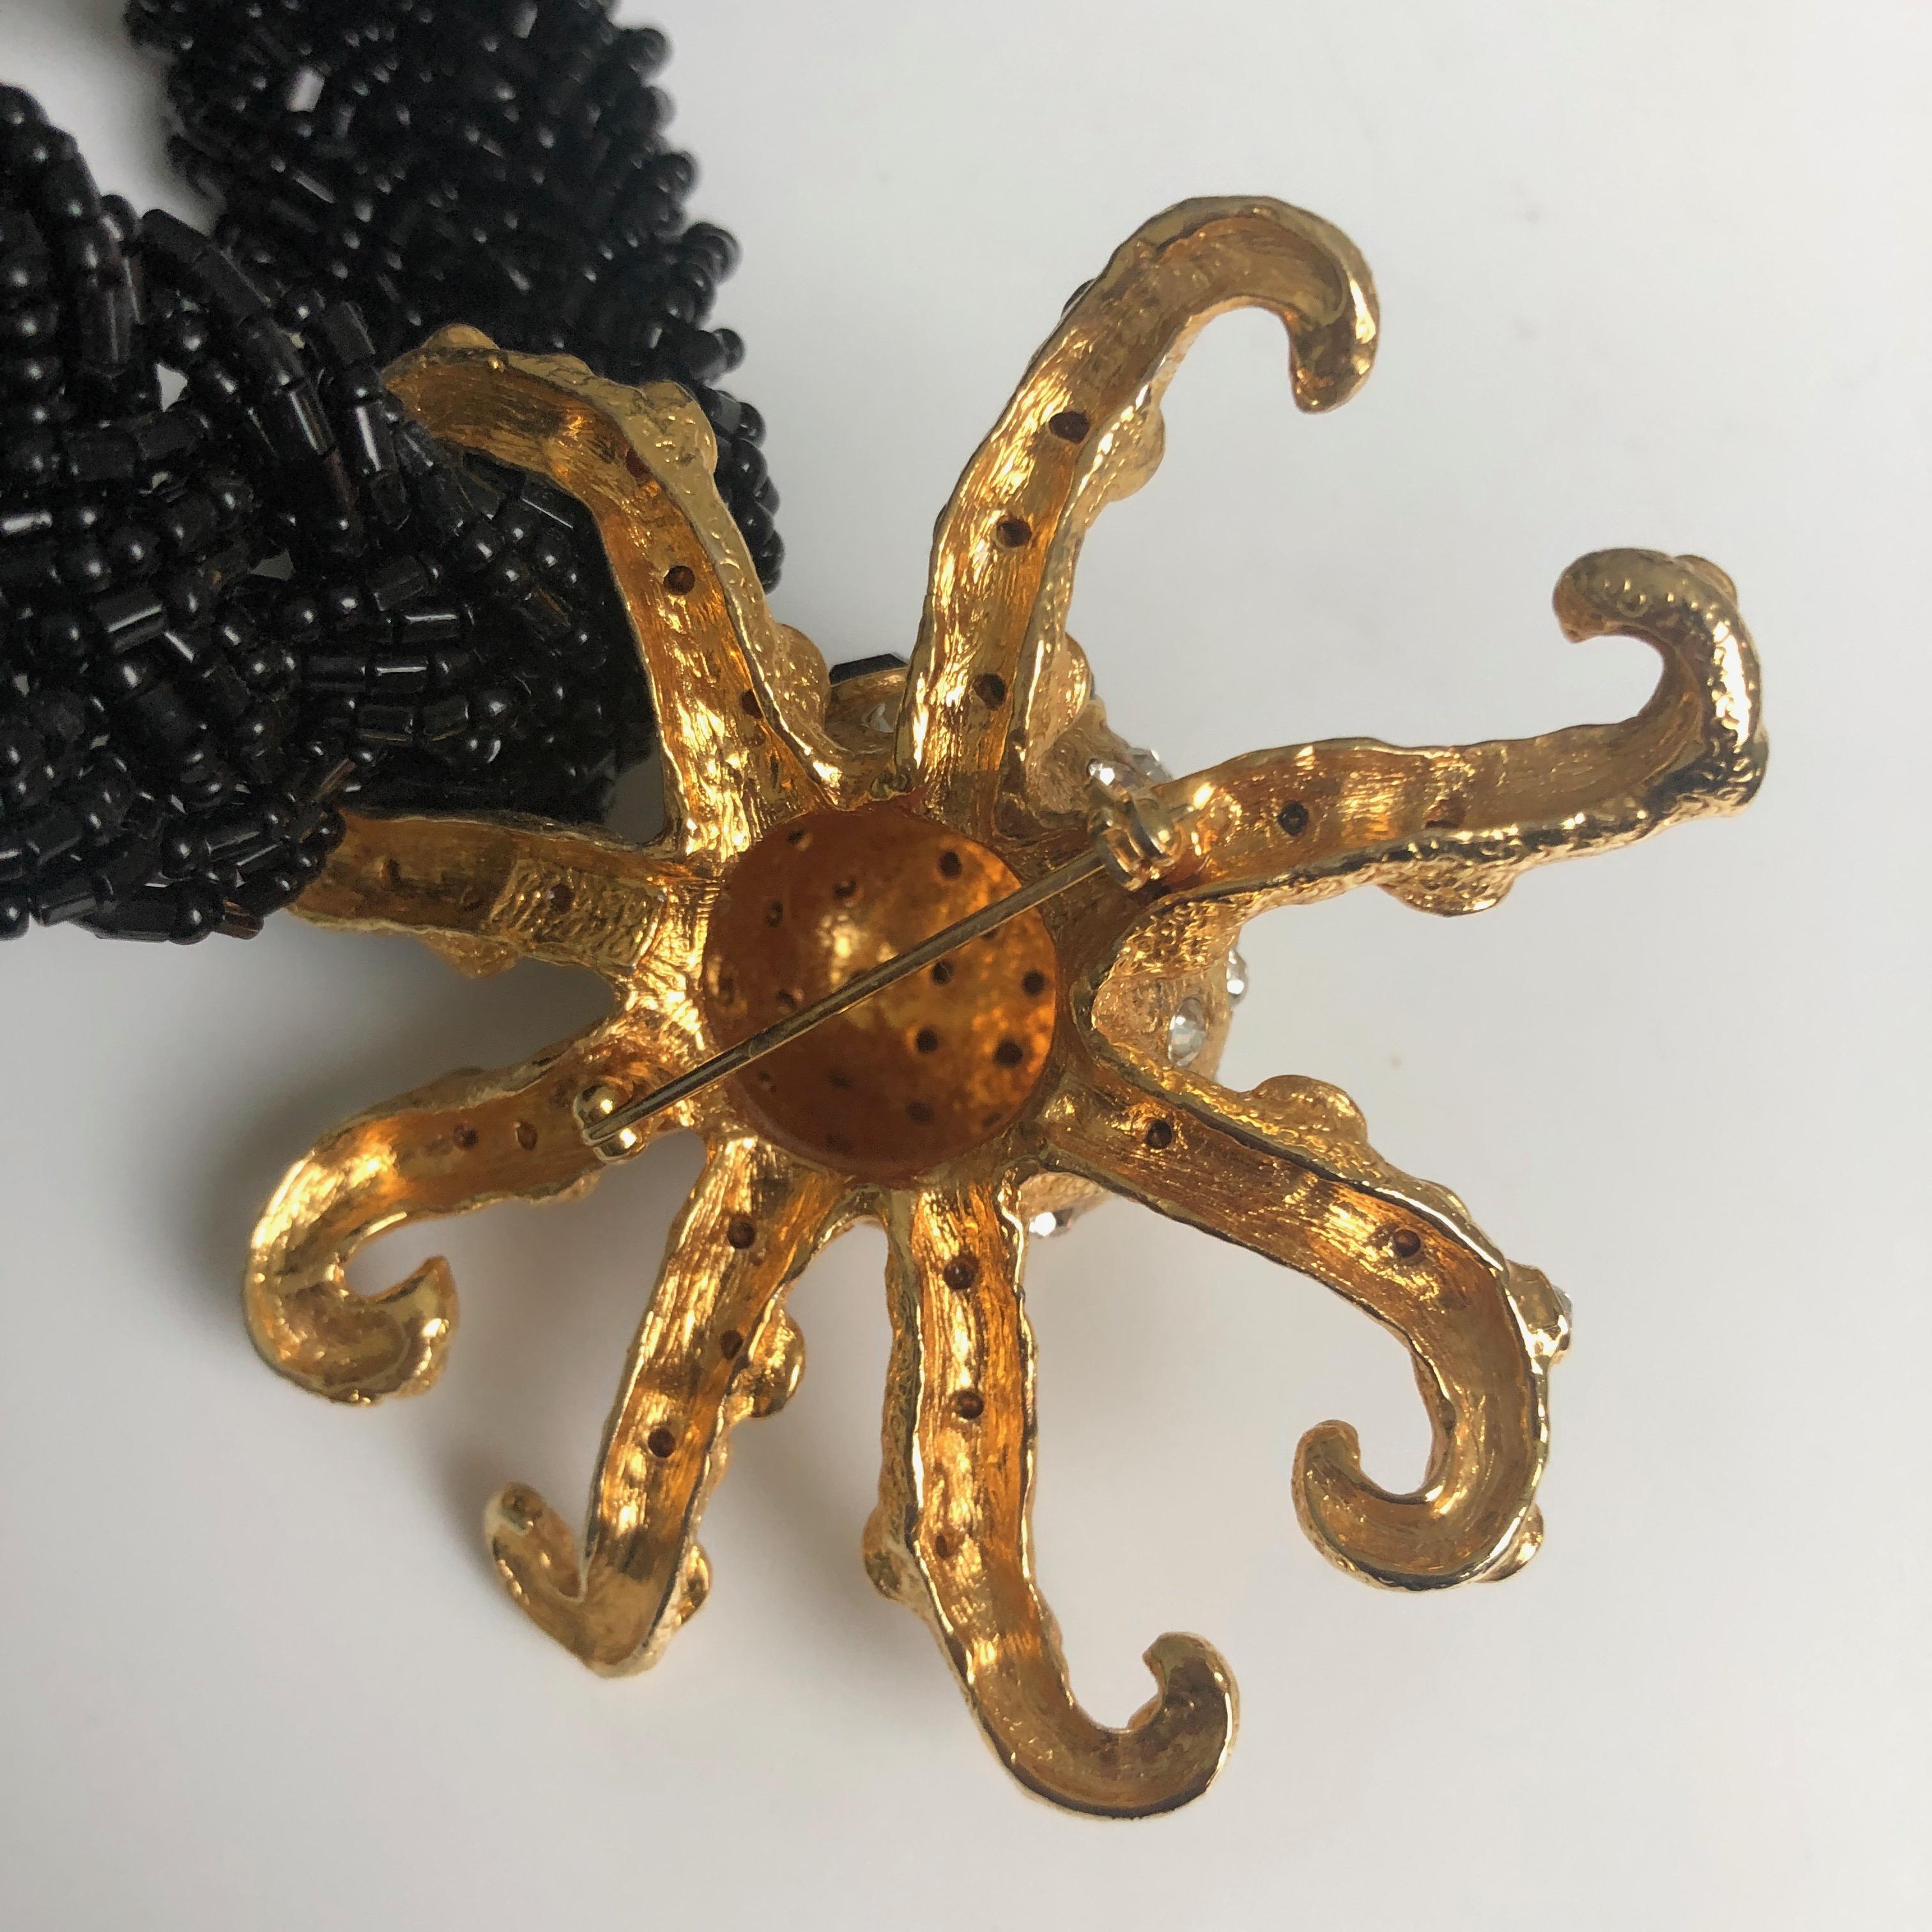 Embellished Octopus Necklace by Stephanie Lake Design Rare Statement Piece For Sale 8